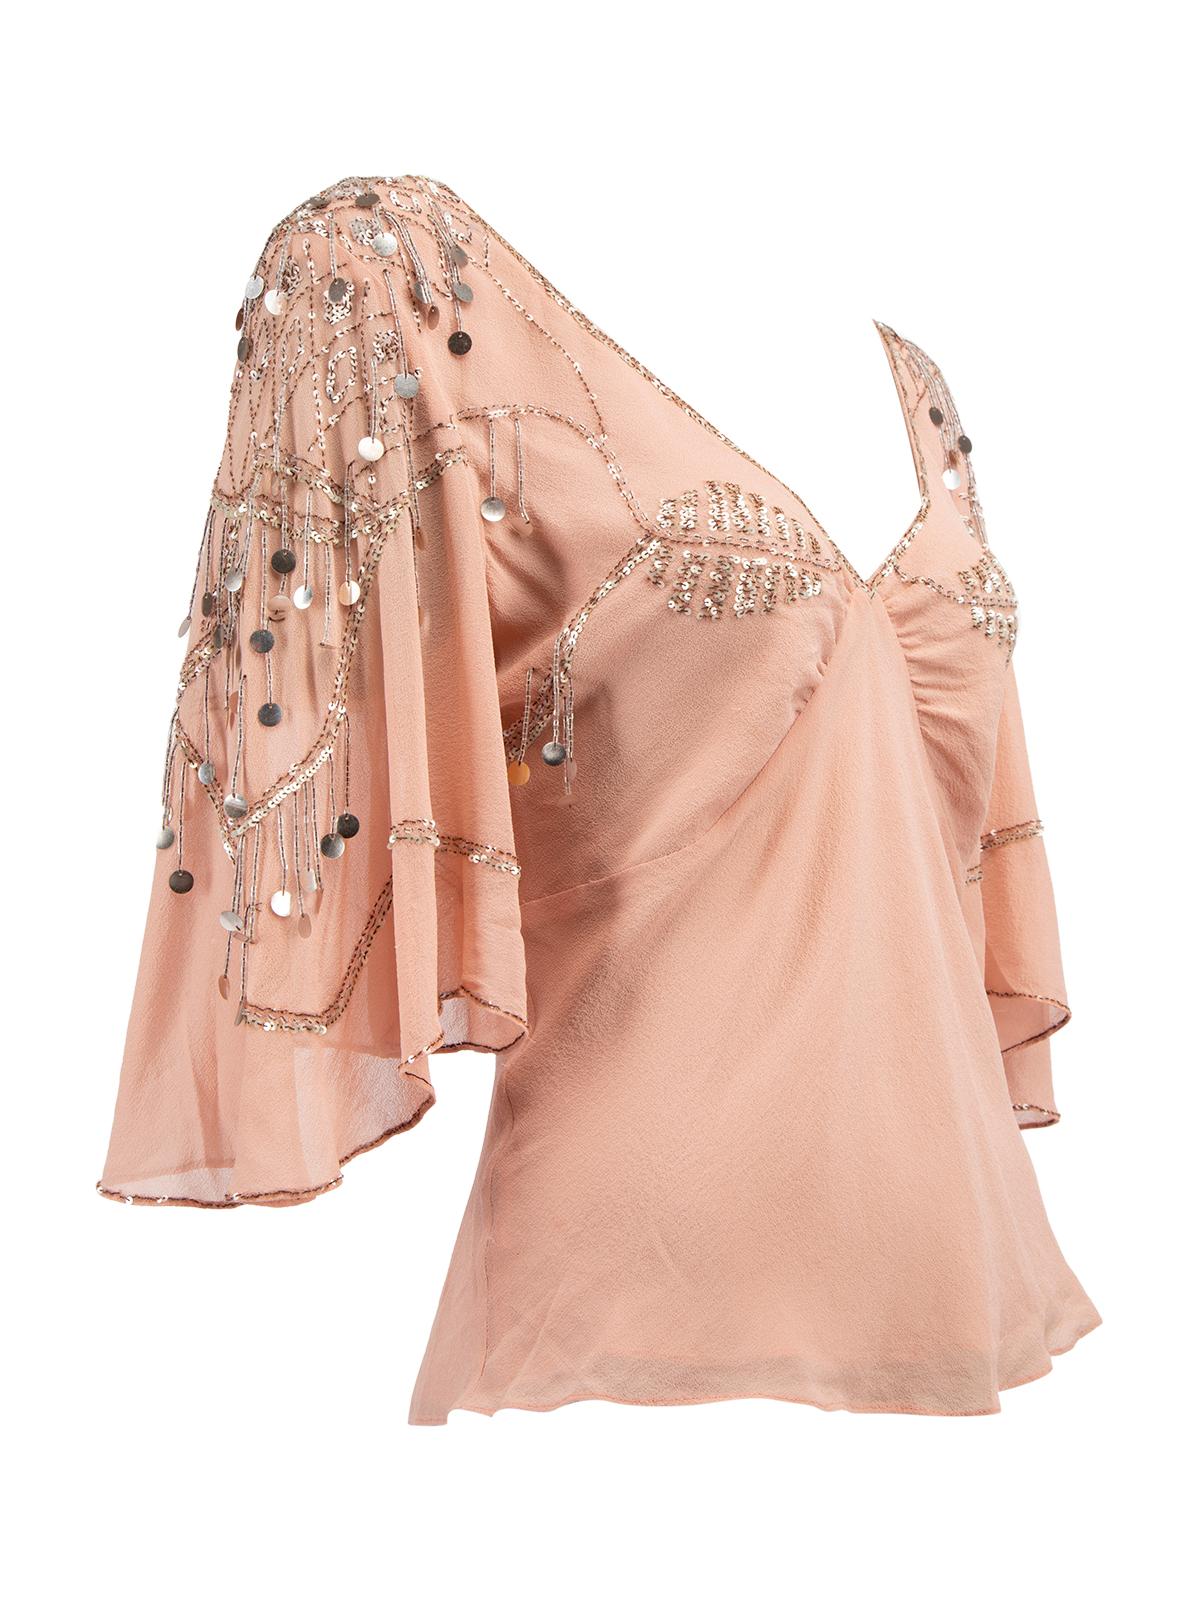 CONDITION is Very good. No visible wear to top is evident on this used Temperley London designer resale item. 



Details


Pink

Silk

Blouse

V neckline

Short flutter sleeves

Embellished with silver tone sequins and and beads

Fully lined with